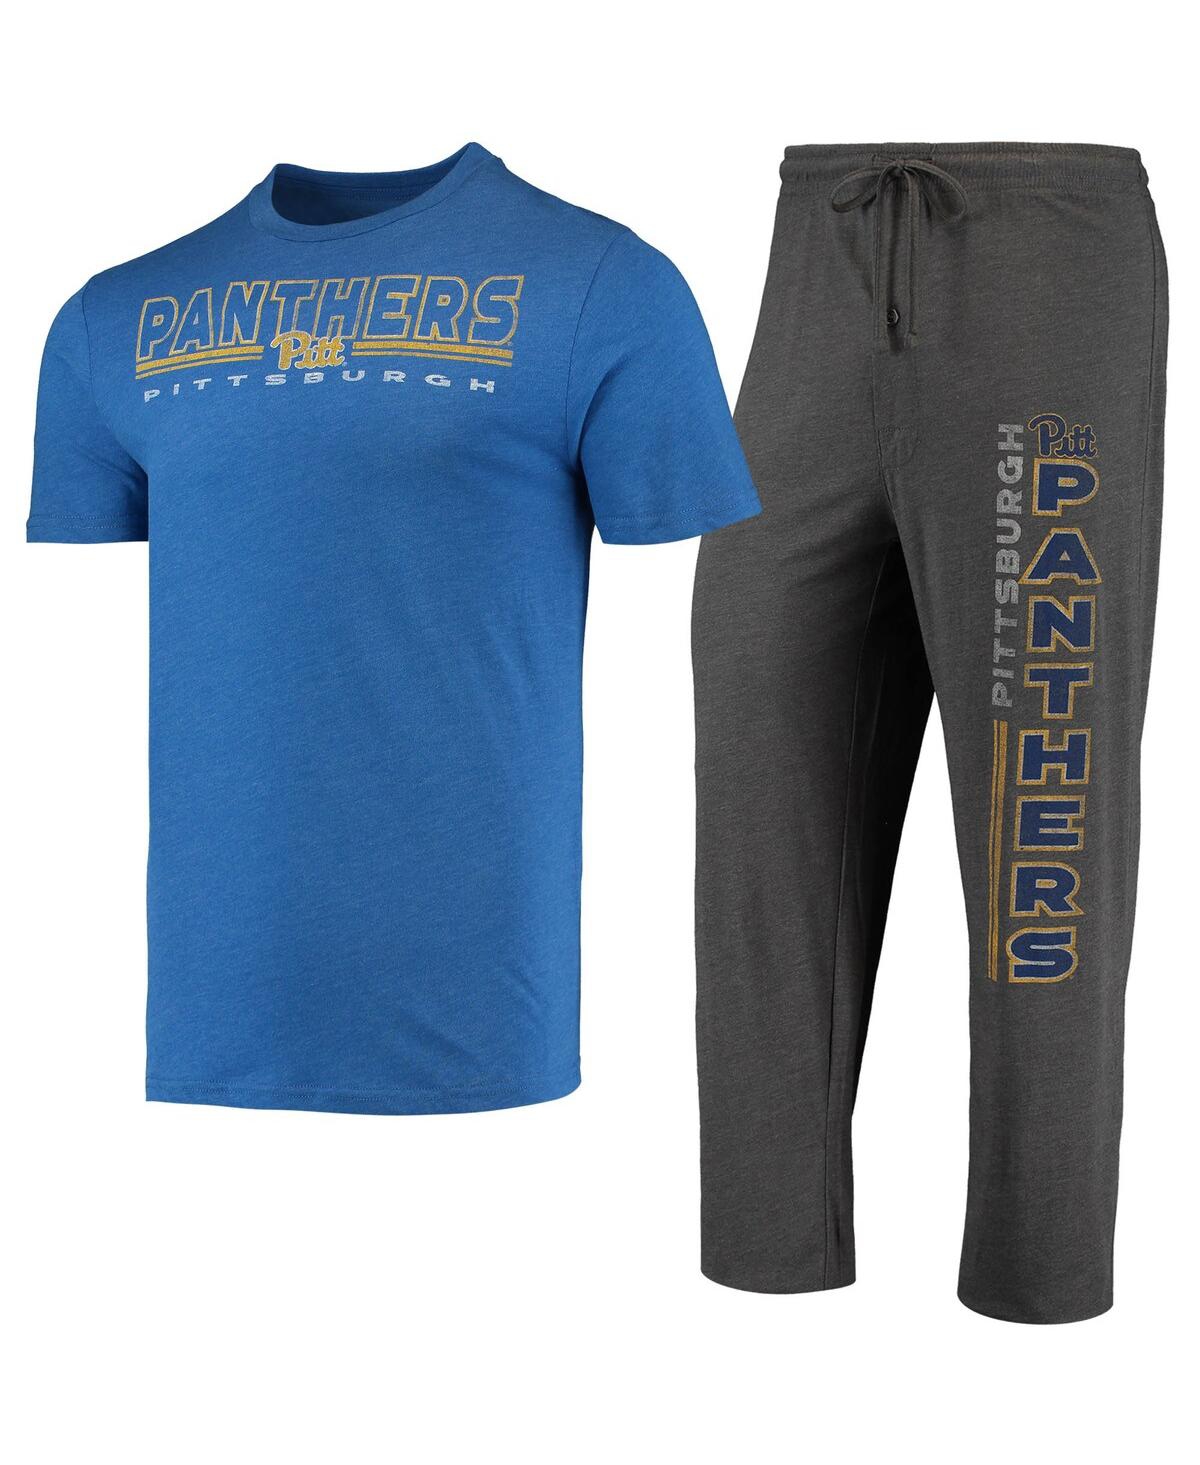 Men's Concepts Sport Heathered Charcoal, Royal Distressed Pitt Panthers Meter T-shirt and Pants Sleep Set - Heathered Charcoal, Royal